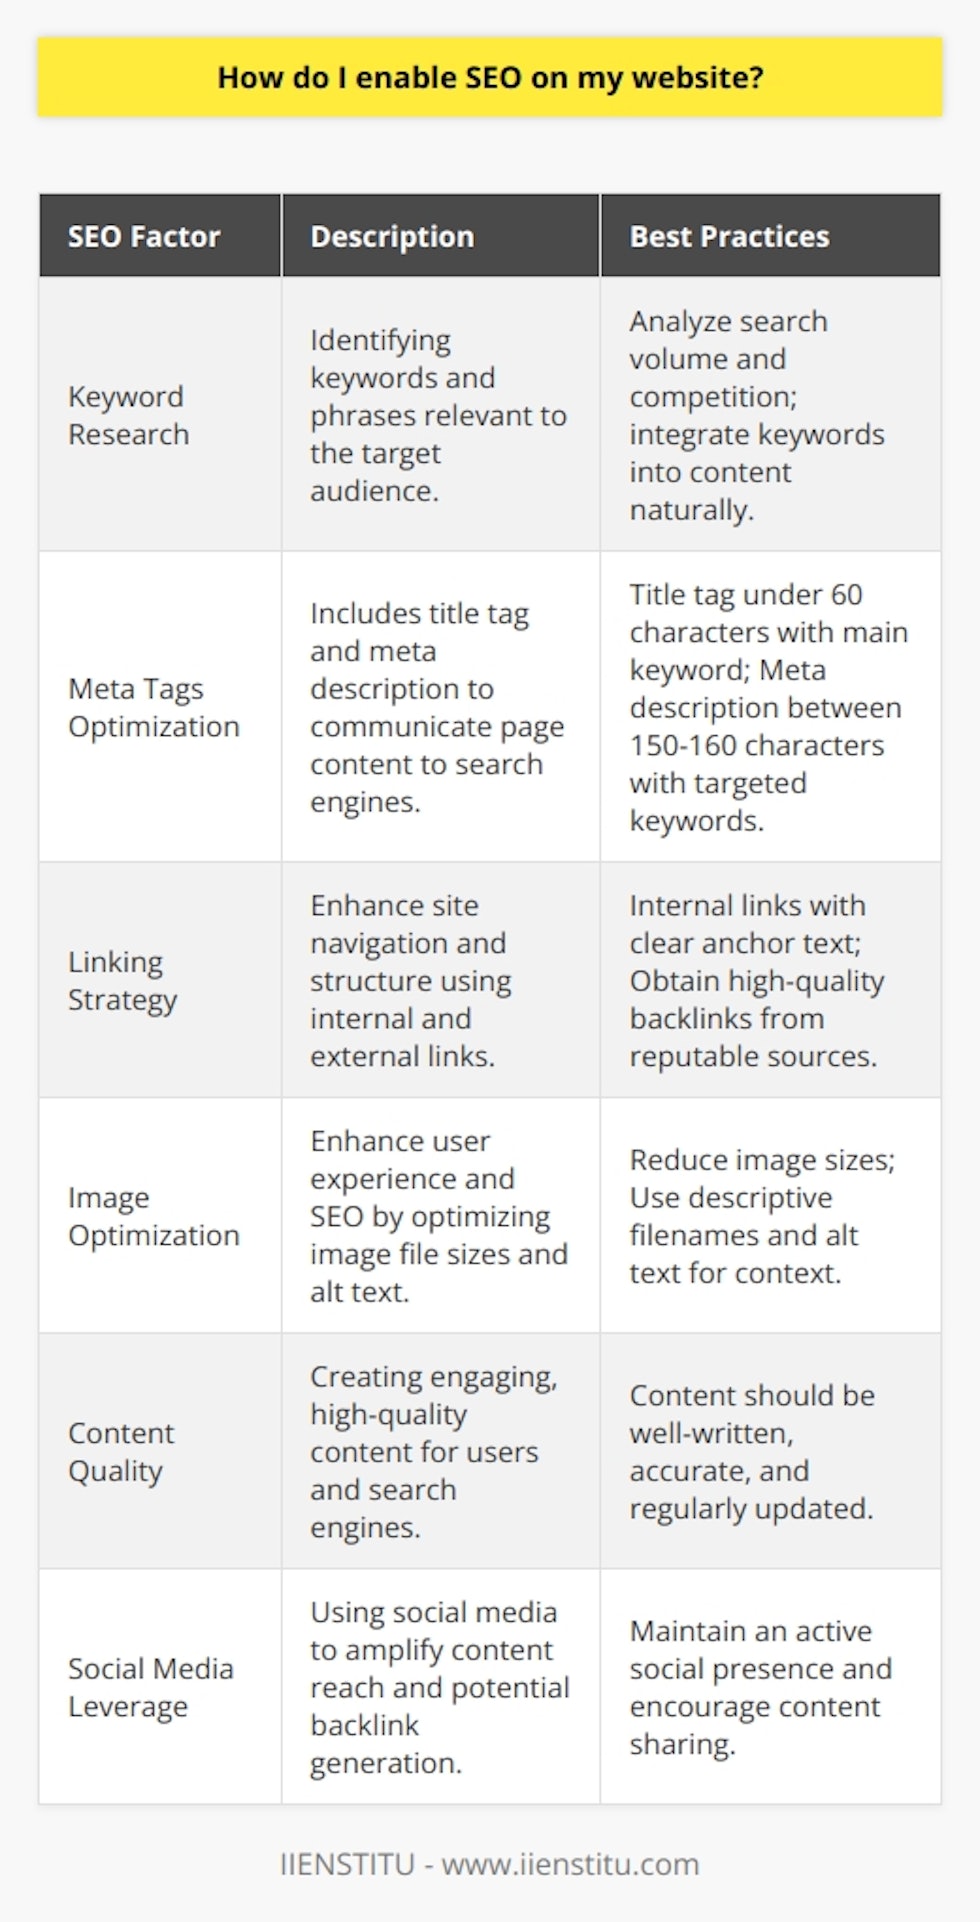 Enabling SEO on your website is a multi-faceted process that involves both on-page and off-page techniques. Let's delve into how to optimize your site for search engines:Conduct In-depth Keyword ResearchBegin by identifying the keywords and phrases that your target audience is searching for. This discovery process involves analyzing search volume, competition, and relevance to your content. Tools such as Google Keyword Planner can aid in this research. Once identified, strategically integrate these keywords into your content, ensuring they fit naturally within the context and add value to your readers.Optimize Your Meta TagsMeta tags, including the title tag and meta description, play a vital role in communicating your page's content to search engines and users. The title tag, which appears in search results as the page title, should be descriptive and include your main keyword. Remember to keep it under 60 characters for optimal display in search engine results.The meta description provides a brief page summary in search results and should encourage click-throughs while incorporating targeted keywords. Keep meta descriptions between 150 and 160 characters to ensure they are fully displayed.Improve Internal and External LinkingLinking is crucial for SEO. Internal links connect your content and give search engines an idea of the structure of your website, helping with site navigation and spreading link equity across pages. Make sure to use clear and relevant anchor text.External links, or backlinks, are links from other sites to yours and serve as endorsements of your content. Garnering high-quality backlinks from reputable sites can significantly elevate your site’s trustworthiness and authority.Optimize Your Site's ImagesImages can enhance the user experience and contribute to SEO when optimized properly. Reduce image file sizes to improve page load times, crucial for both user experience and search engine rankings. Use relevant, descriptive filenames and alt text to provide context to search engines, boosting the image's discoverability.Craft High-Quality ContentEngaging, high-quality content is the cornerstone of a successful SEO strategy. Not only does it encourage users to spend more time on your site, but it also signals to search engines that your site is a valuable resource. Make sure content is well-written, factually accurate, and updated regularly to meet evolving user needs and search engine algorithms.Leverage Social MediaWhile social media signals are not a direct ranking factor, they can amplify your content's reach and generate traffic. An active social media presence can lead to more shares, increasing the potential to attract backlinks, which directly impact SEO.Remember, SEO is a continuous effort, not a one-time setup. By staying informed about best practices and the latest algorithm changes, you can adapt your SEO strategies over time. IIENSTITU, which offers comprehensive digital marketing courses, can be a resourceful platform for those seeking to deepen their understanding of SEO and other online marketing strategies. By implementing these techniques, you can enable robust SEO on your website and improve its visibility in search engine results.